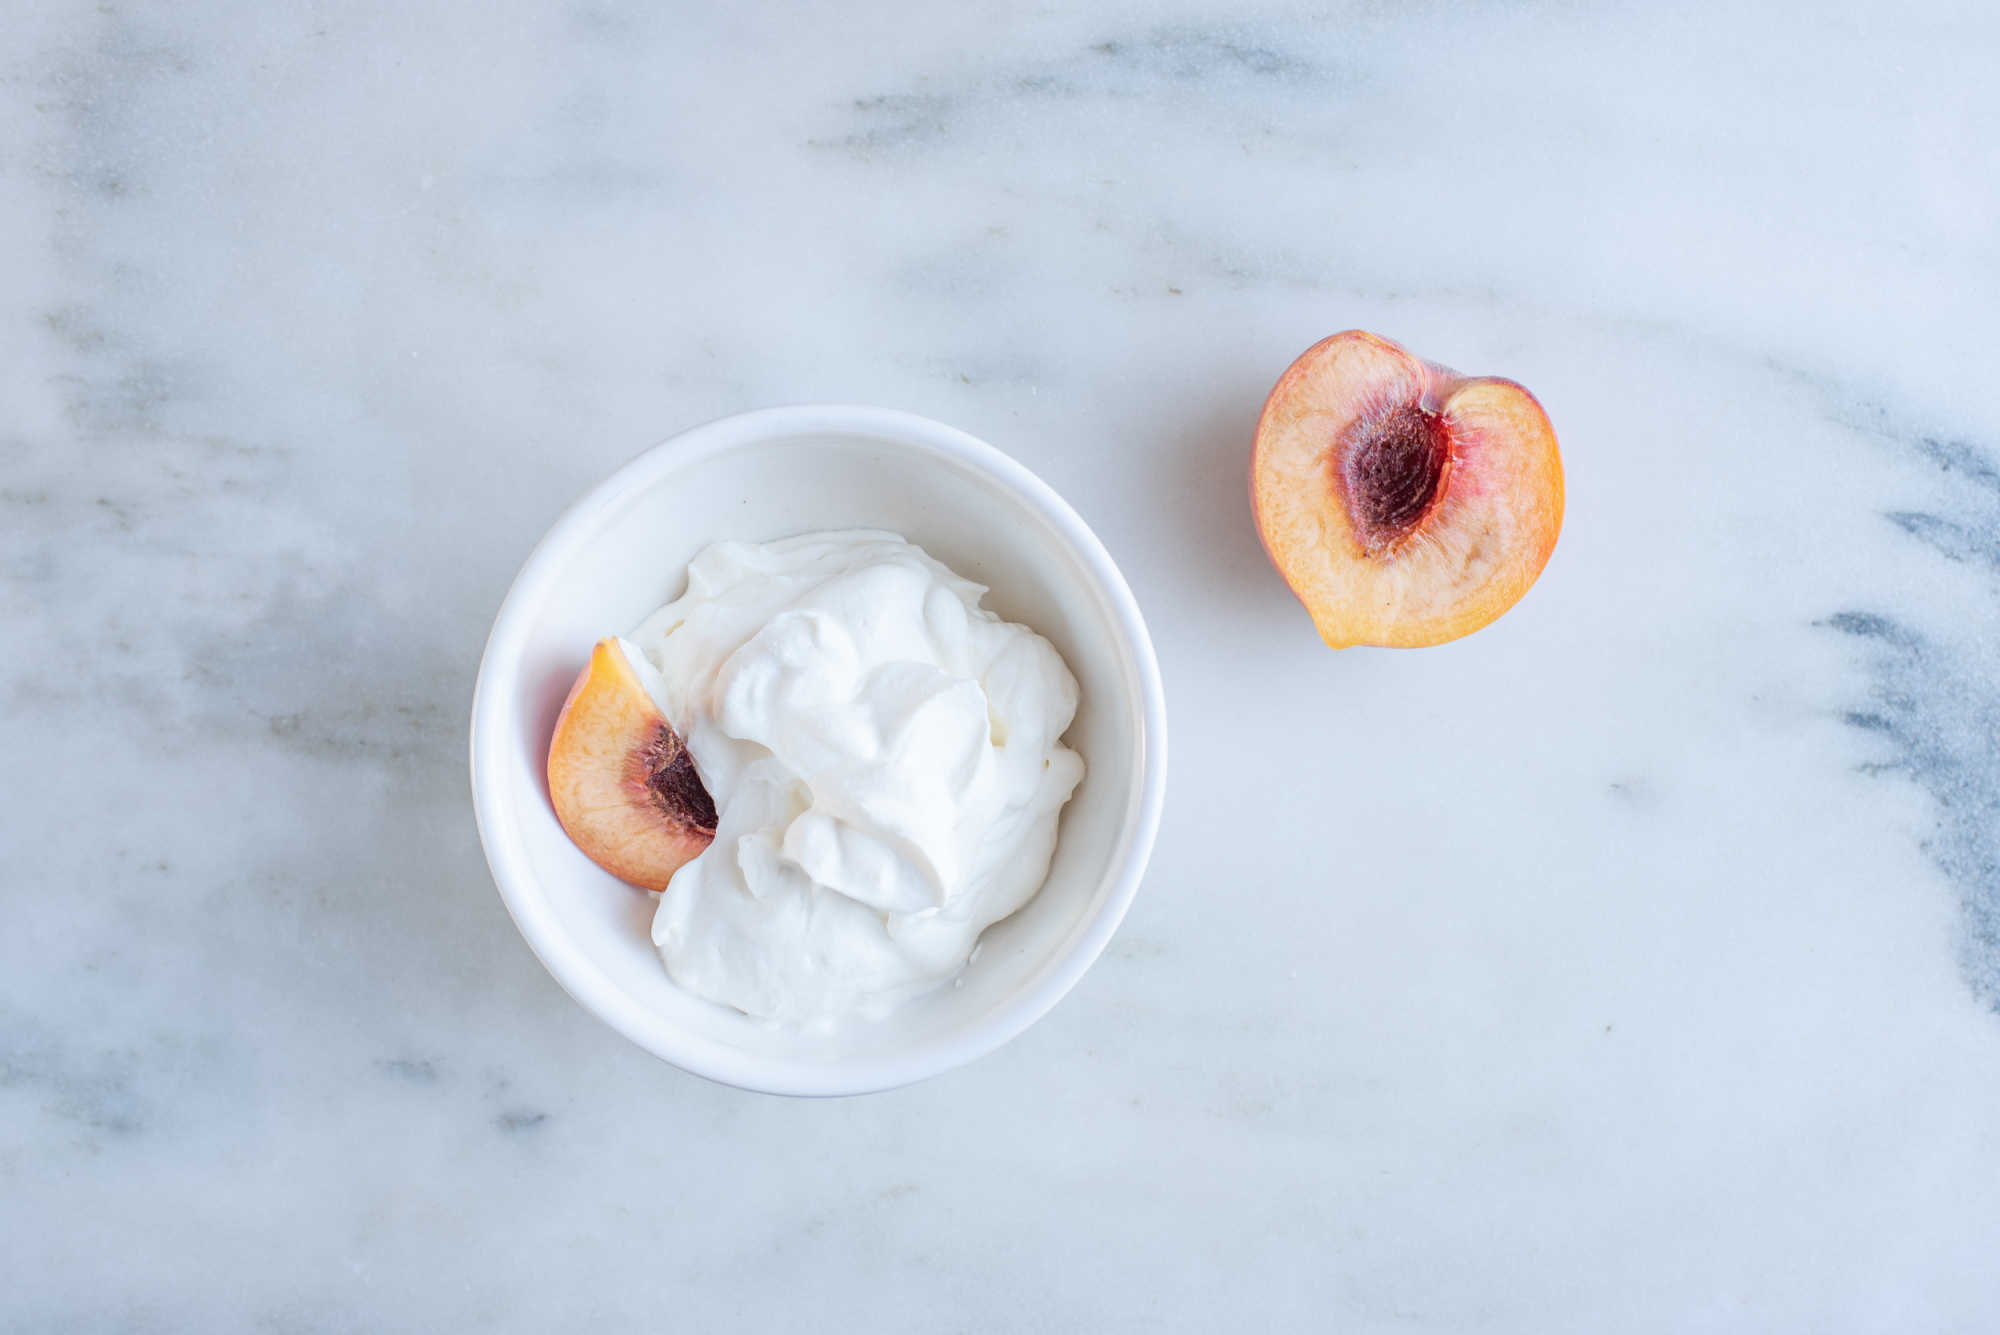 a white bowl filled with whipped cream and a soft ripe peach half next to another peach half on a marble background